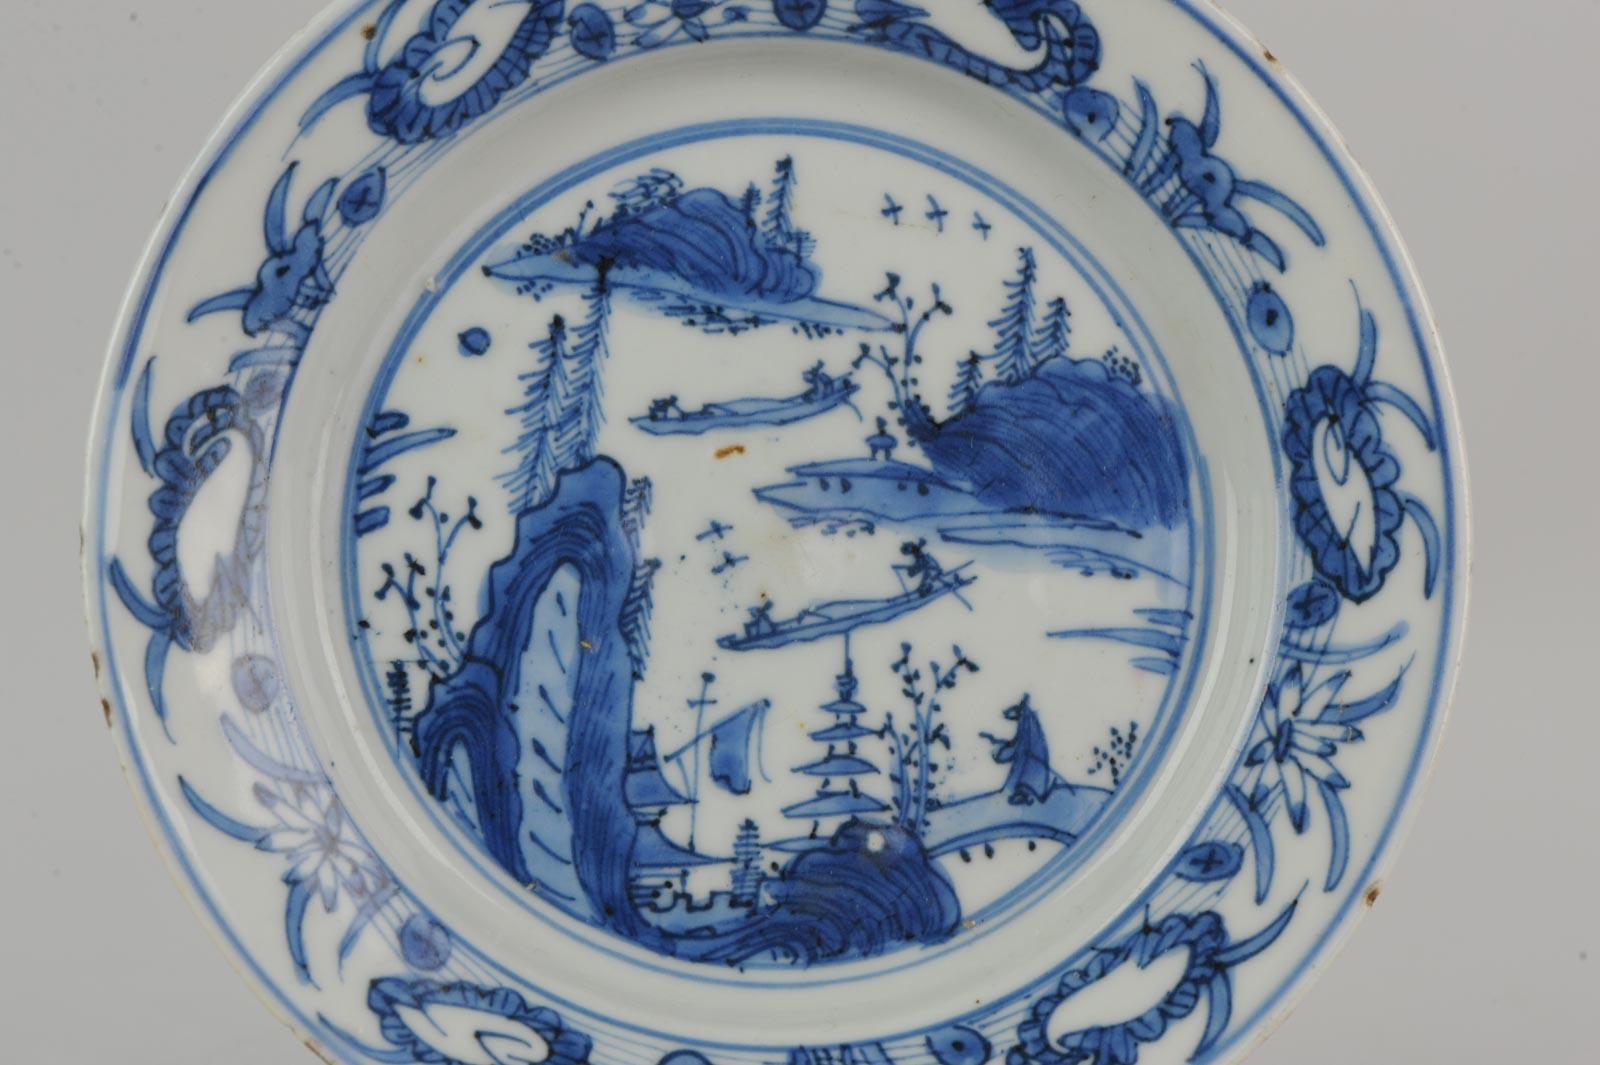 Antique Chinese Porcelain Ming 1540-1580 Jiajing Wanli Landscape Plate with Bird For Sale 3